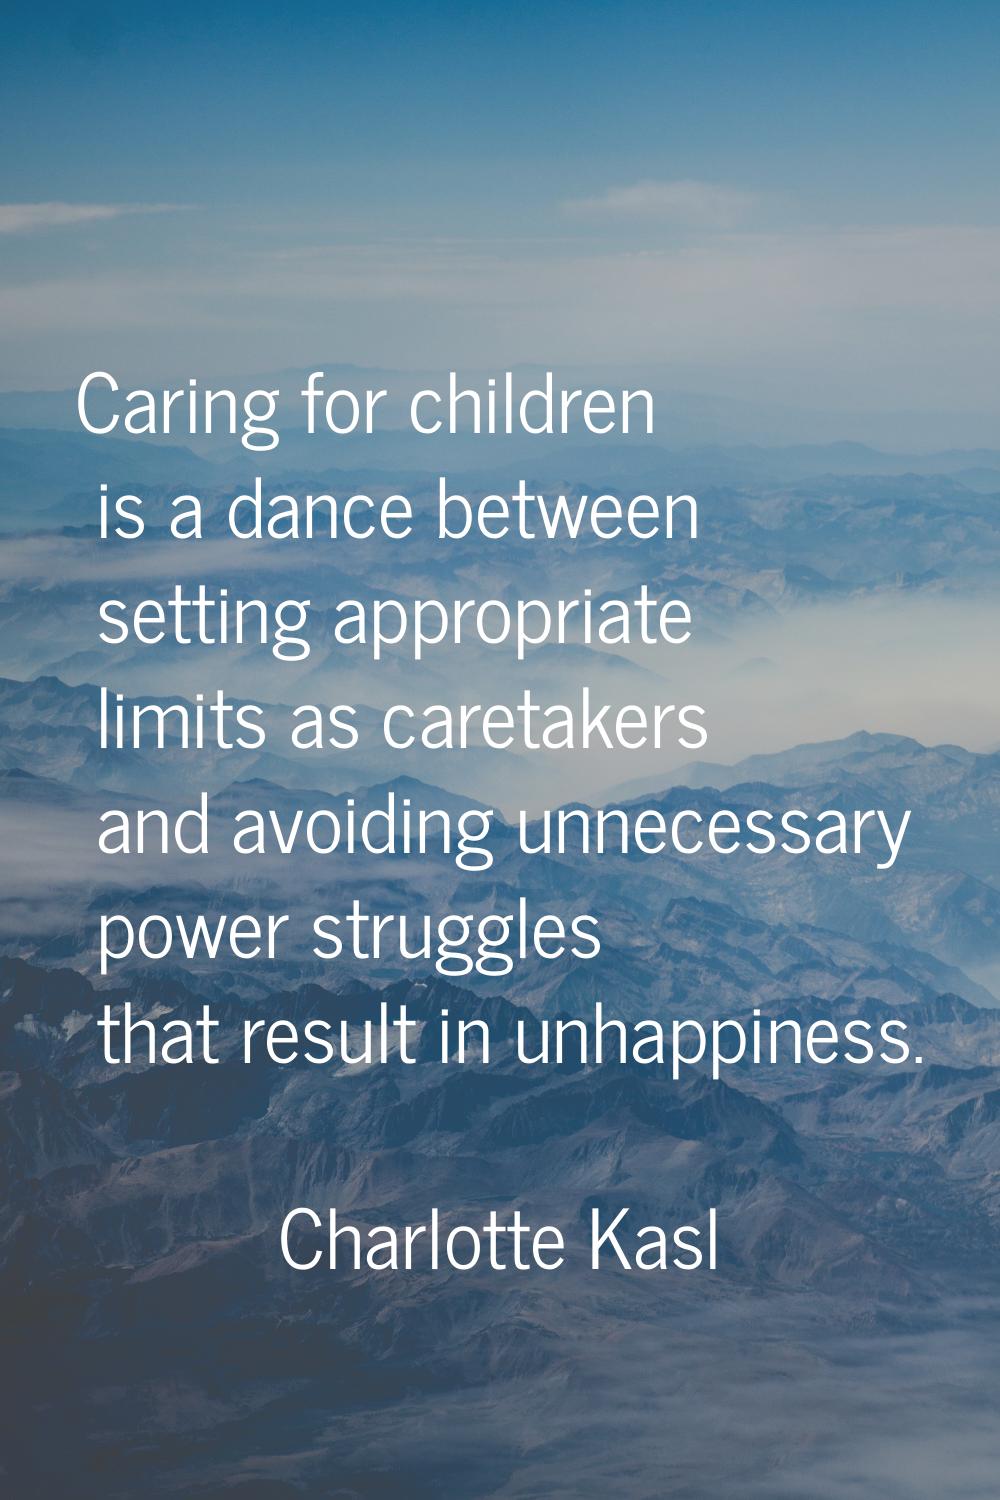 Caring for children is a dance between setting appropriate limits as caretakers and avoiding unnece